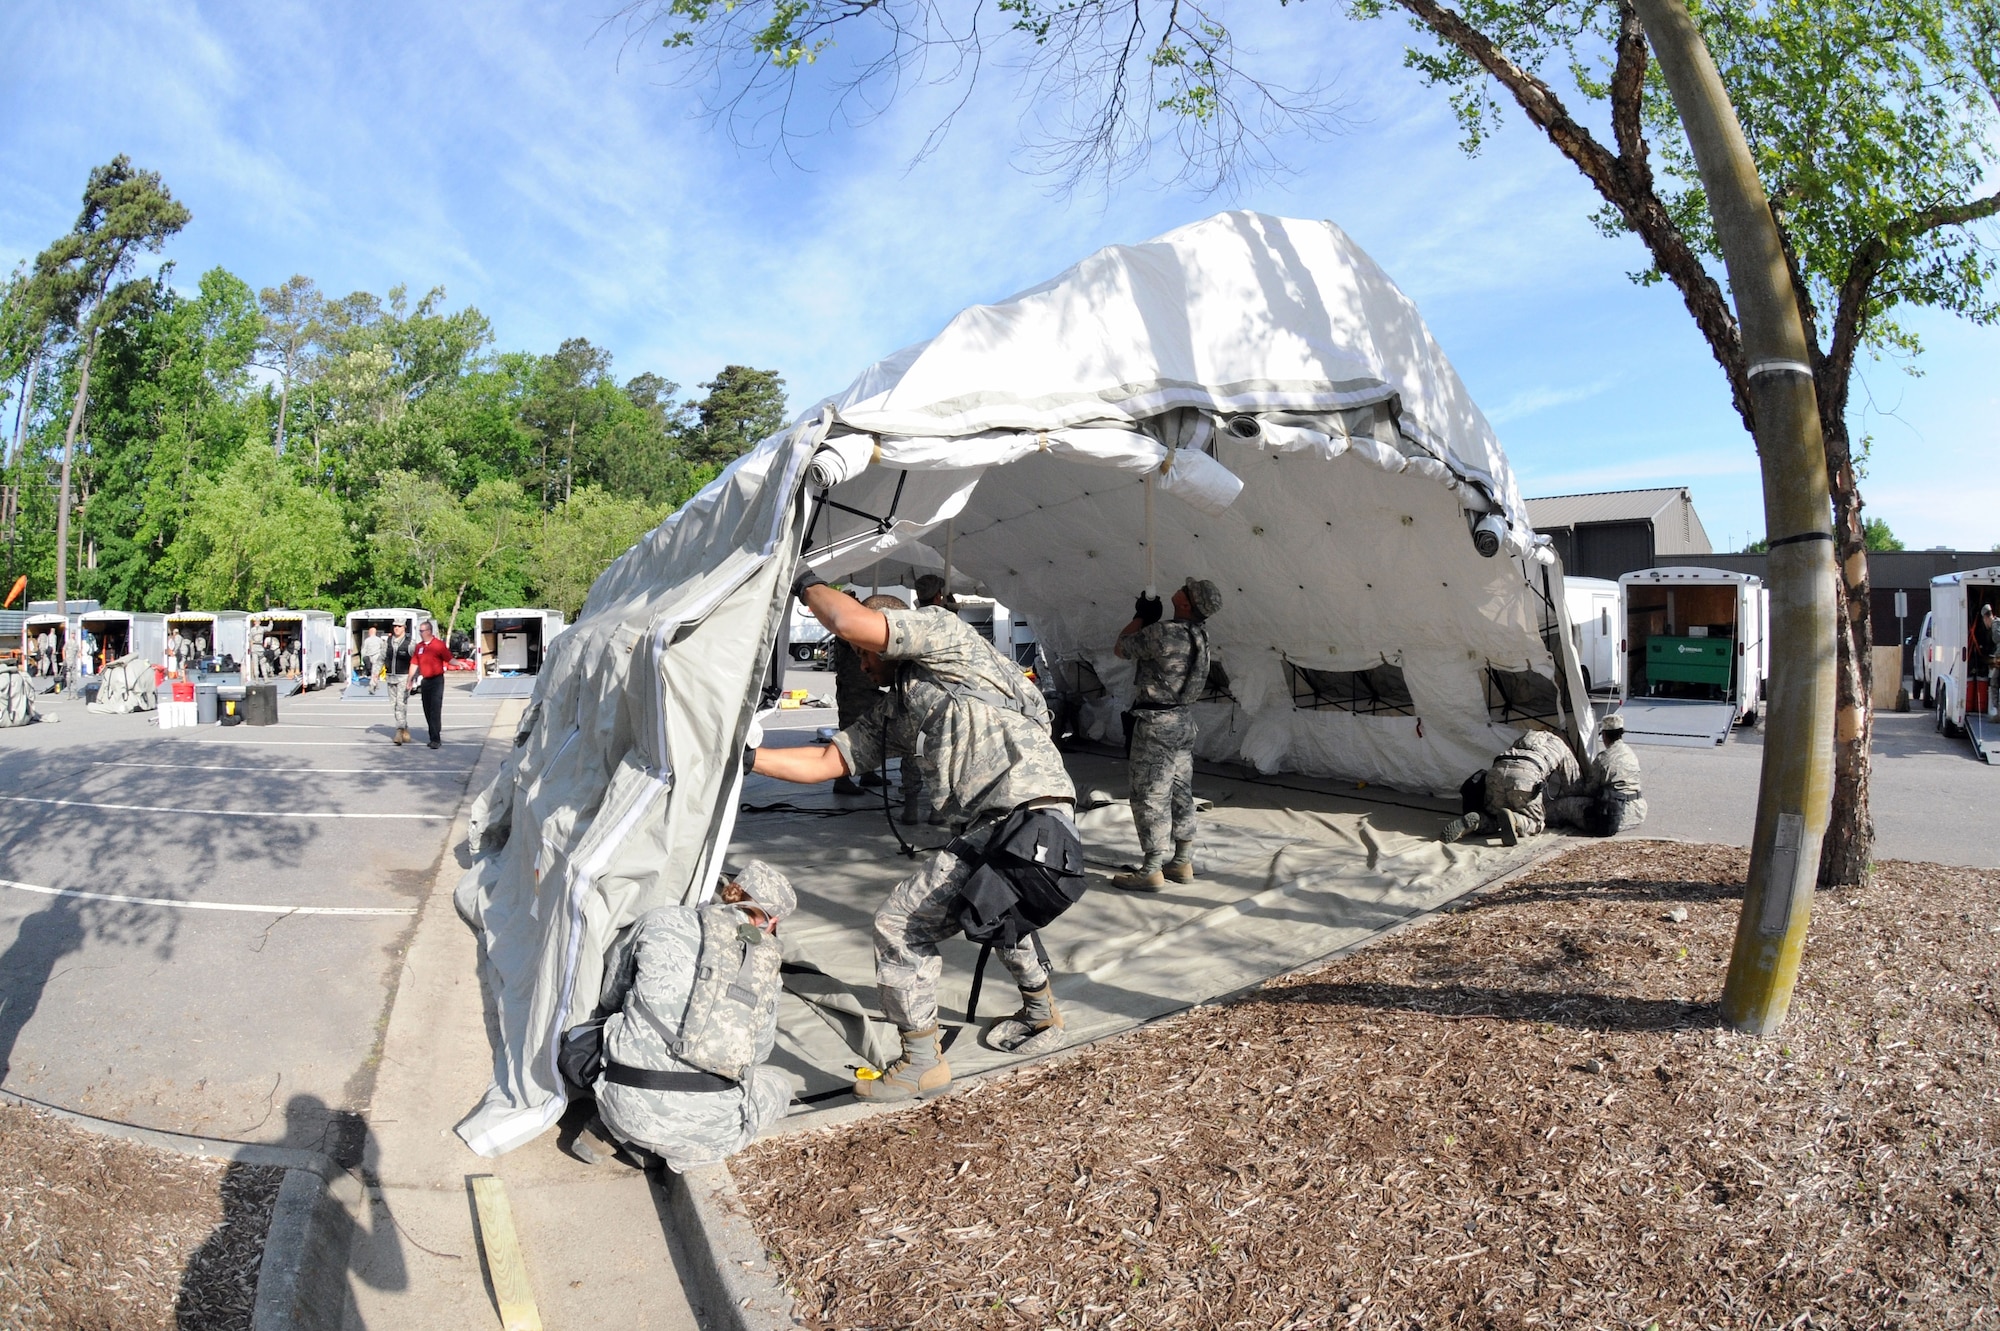 Members of the 113th Wing, D.C. Air National Guard, Fatality Search and Recovery Team put up a tent during Chemical Biological Radiological Nuclear (CBRN) Emergency Response Force Package training, May 14, 2015 in Virginia Beach, Va.  (U.S. Air National Guard photo by Airman 1st Class Anthony Small)